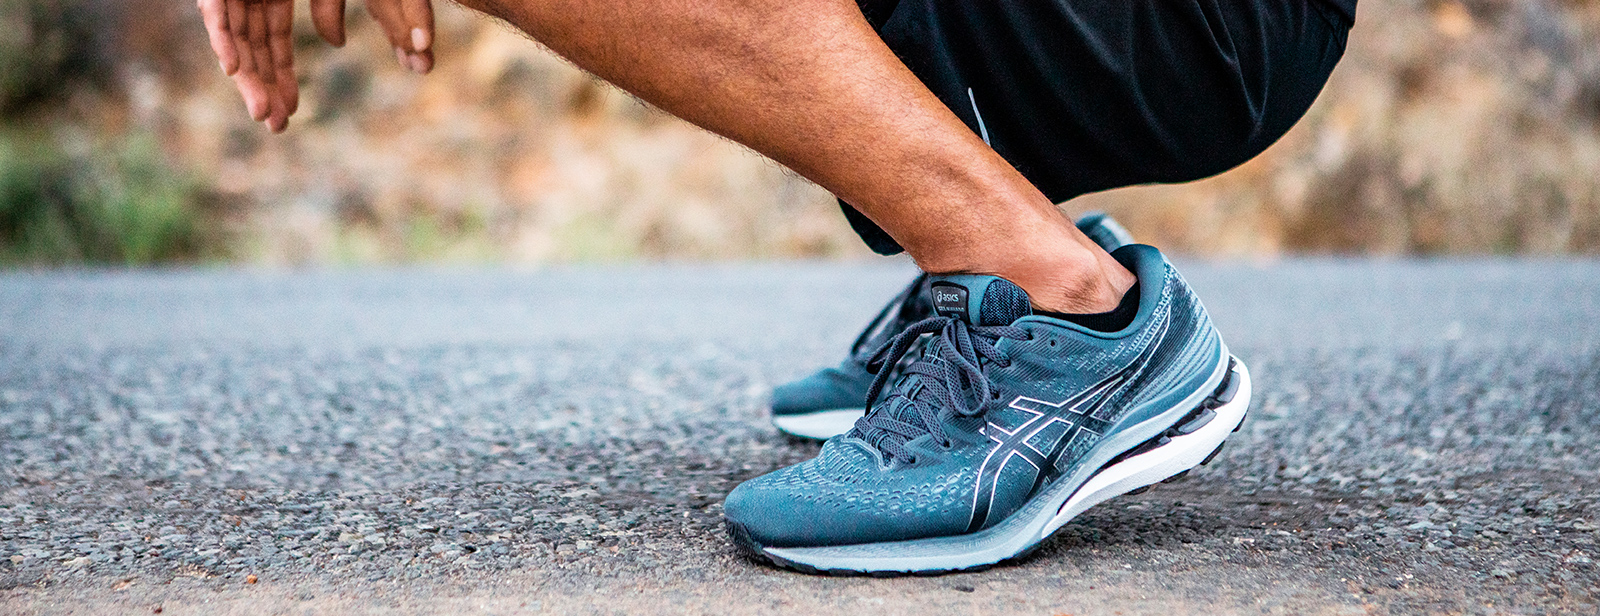 Best Running Shoes With Arch Support | ASICS